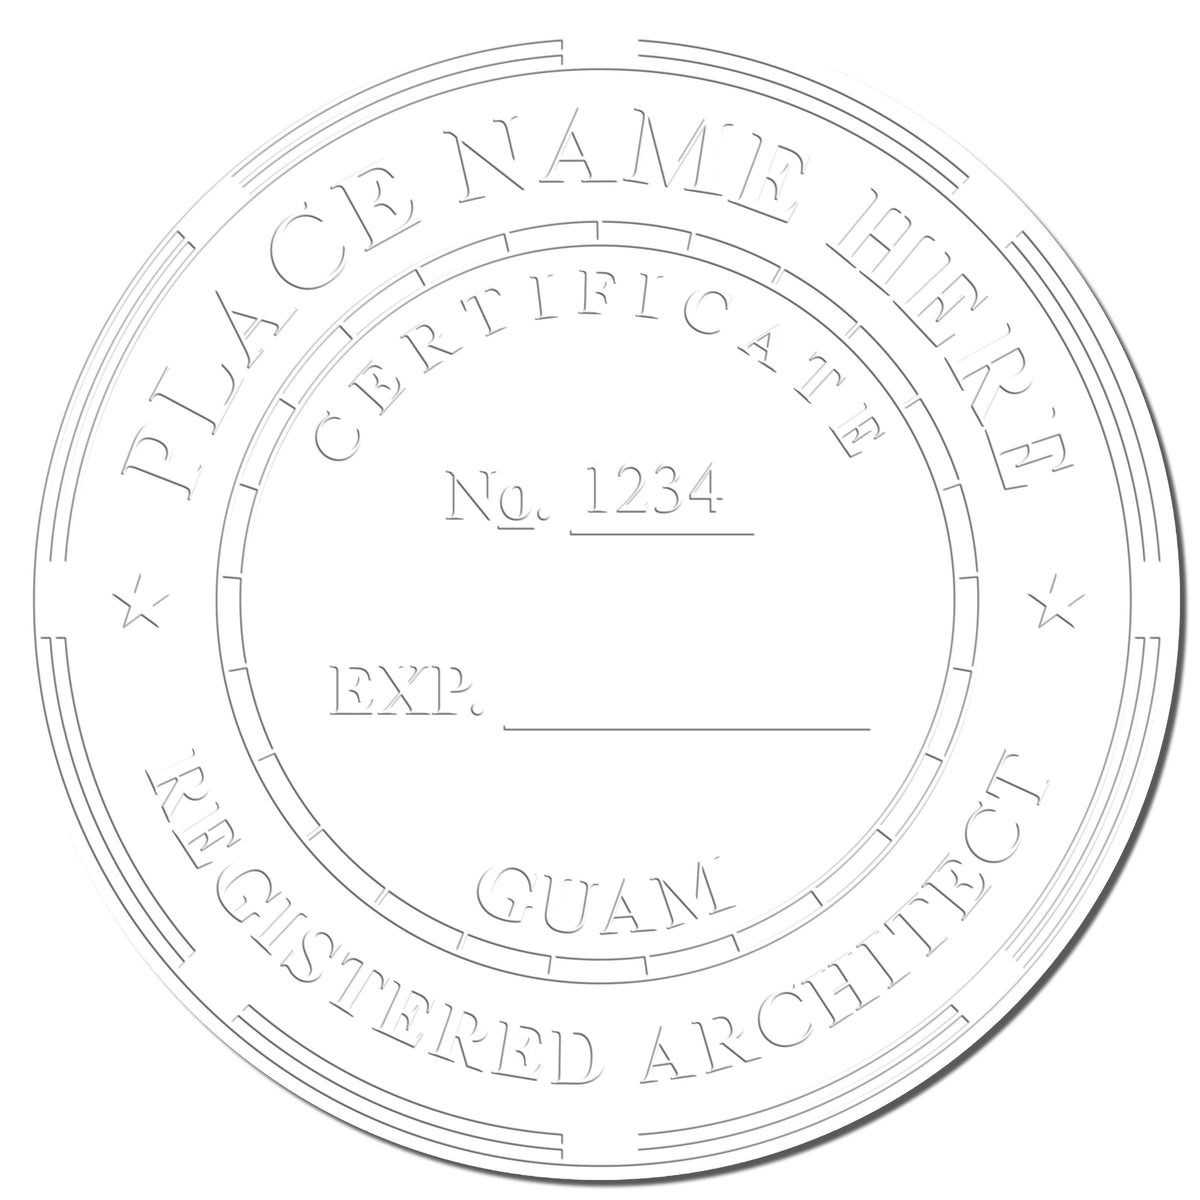 A stamped impression of the State of Guam Long Reach Architectural Embossing Seal in this stylish lifestyle photo, setting the tone for a unique and personalized product.